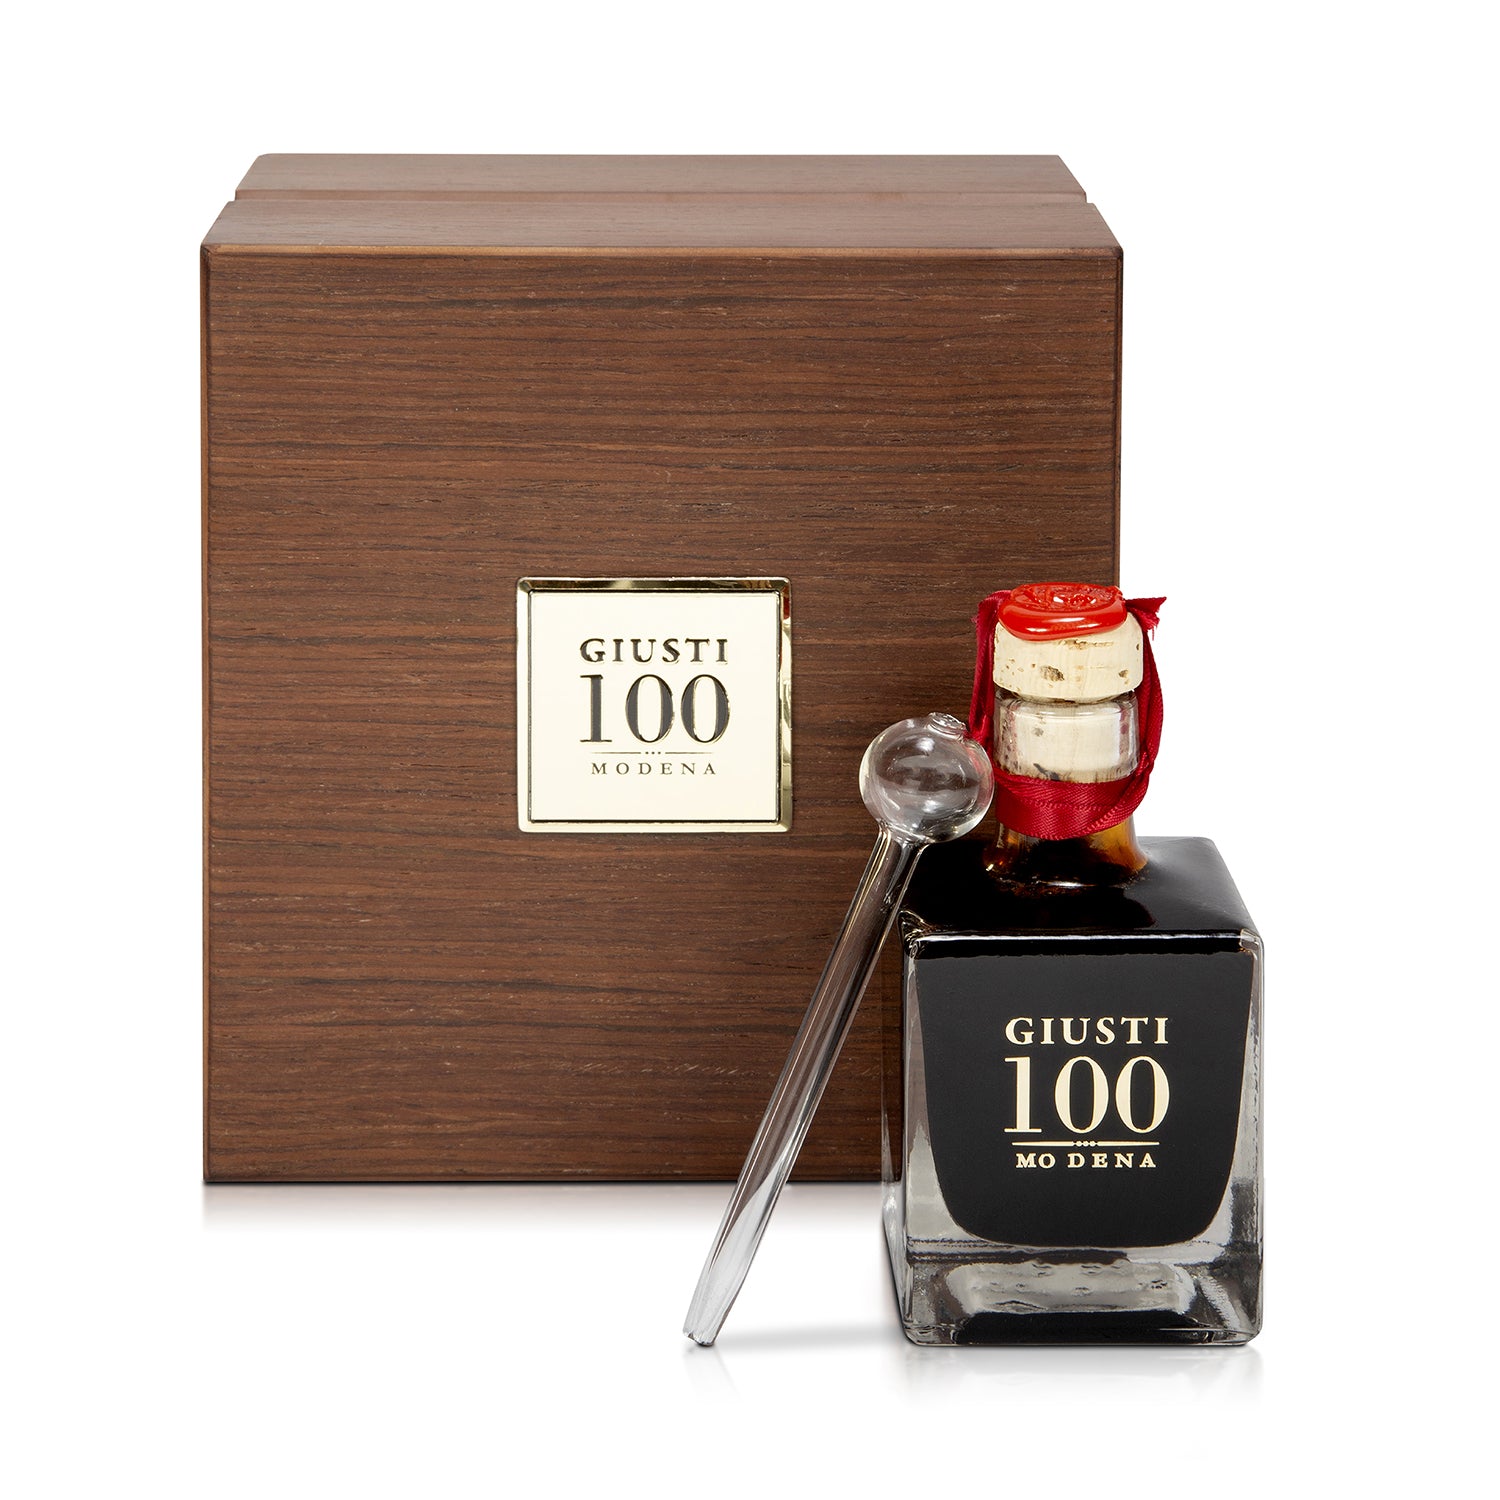 Reserve Traditional 100-Year Balsamic Vinegar and Wooden Box by Giusti